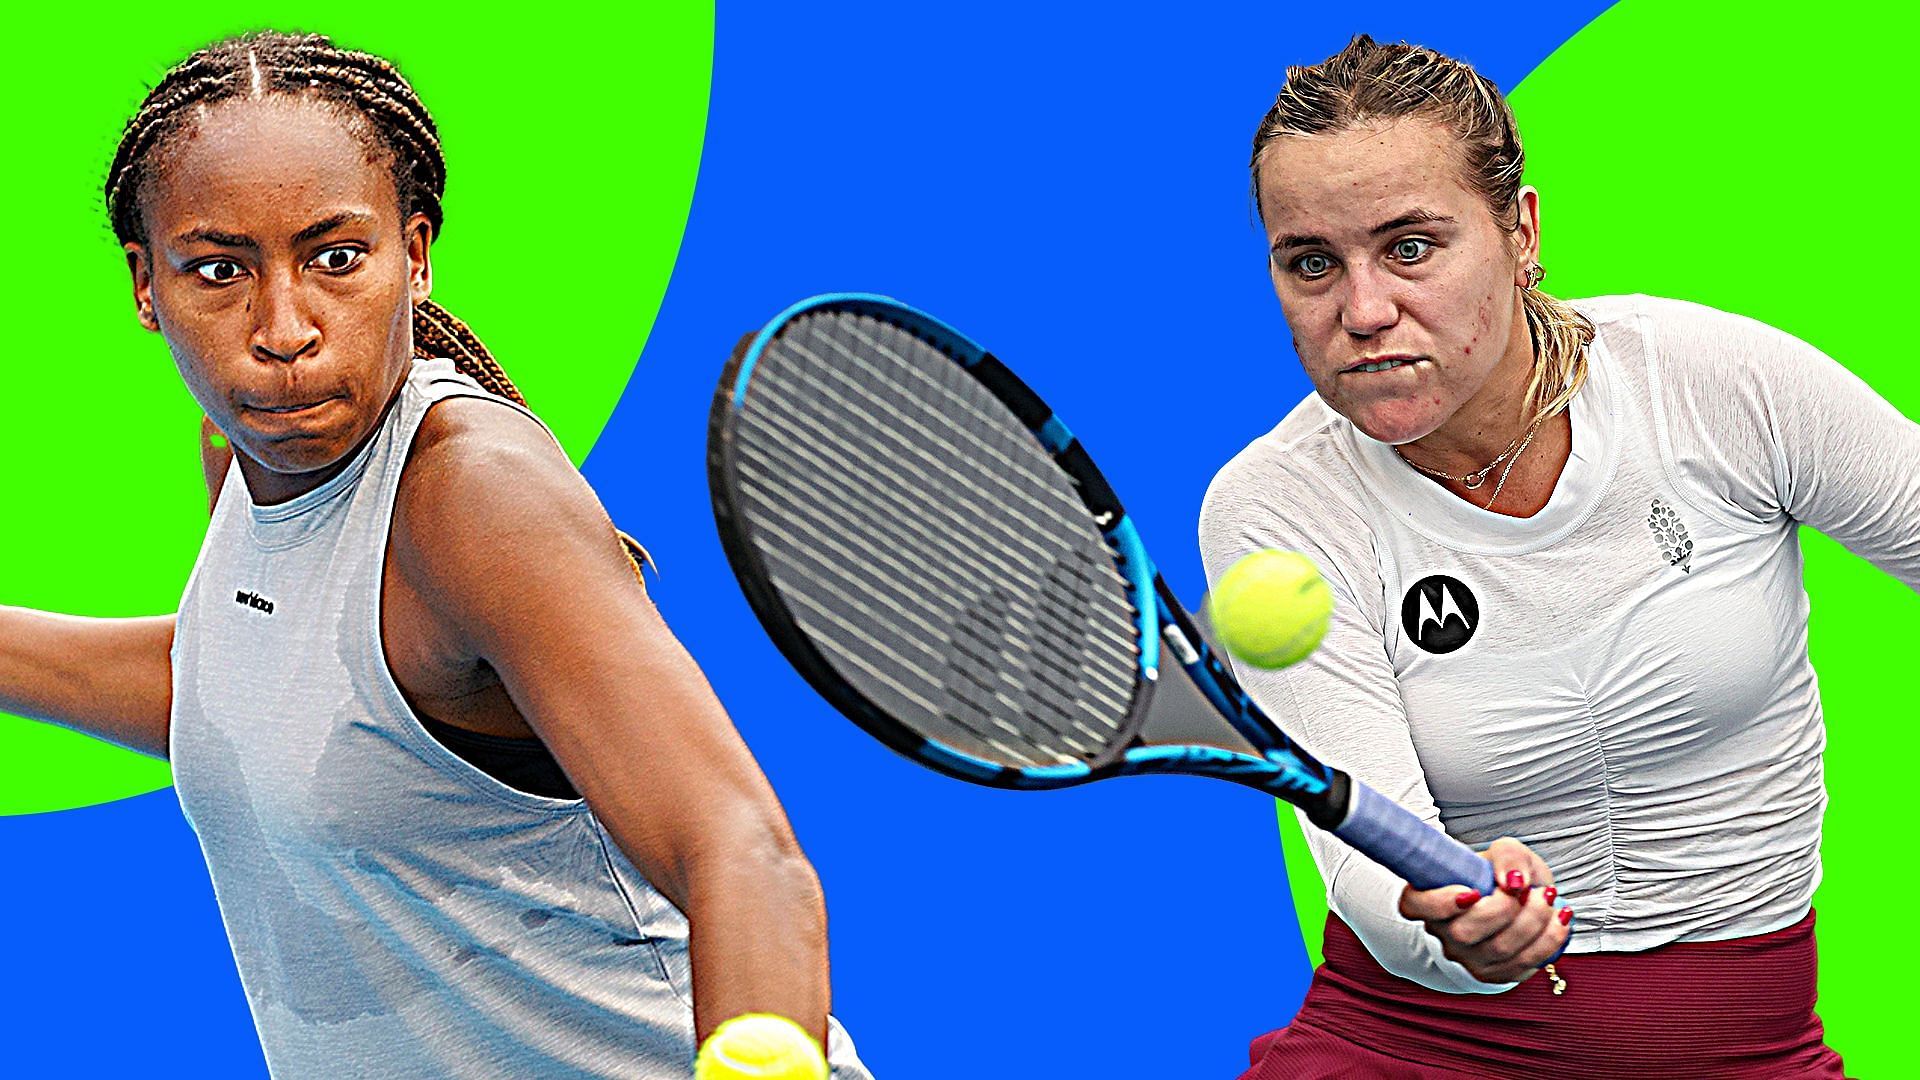 Coco Gauff vs Sofia Kenin: Where to watch, TV schedule, live streaming details and more | ASB Classic 2023